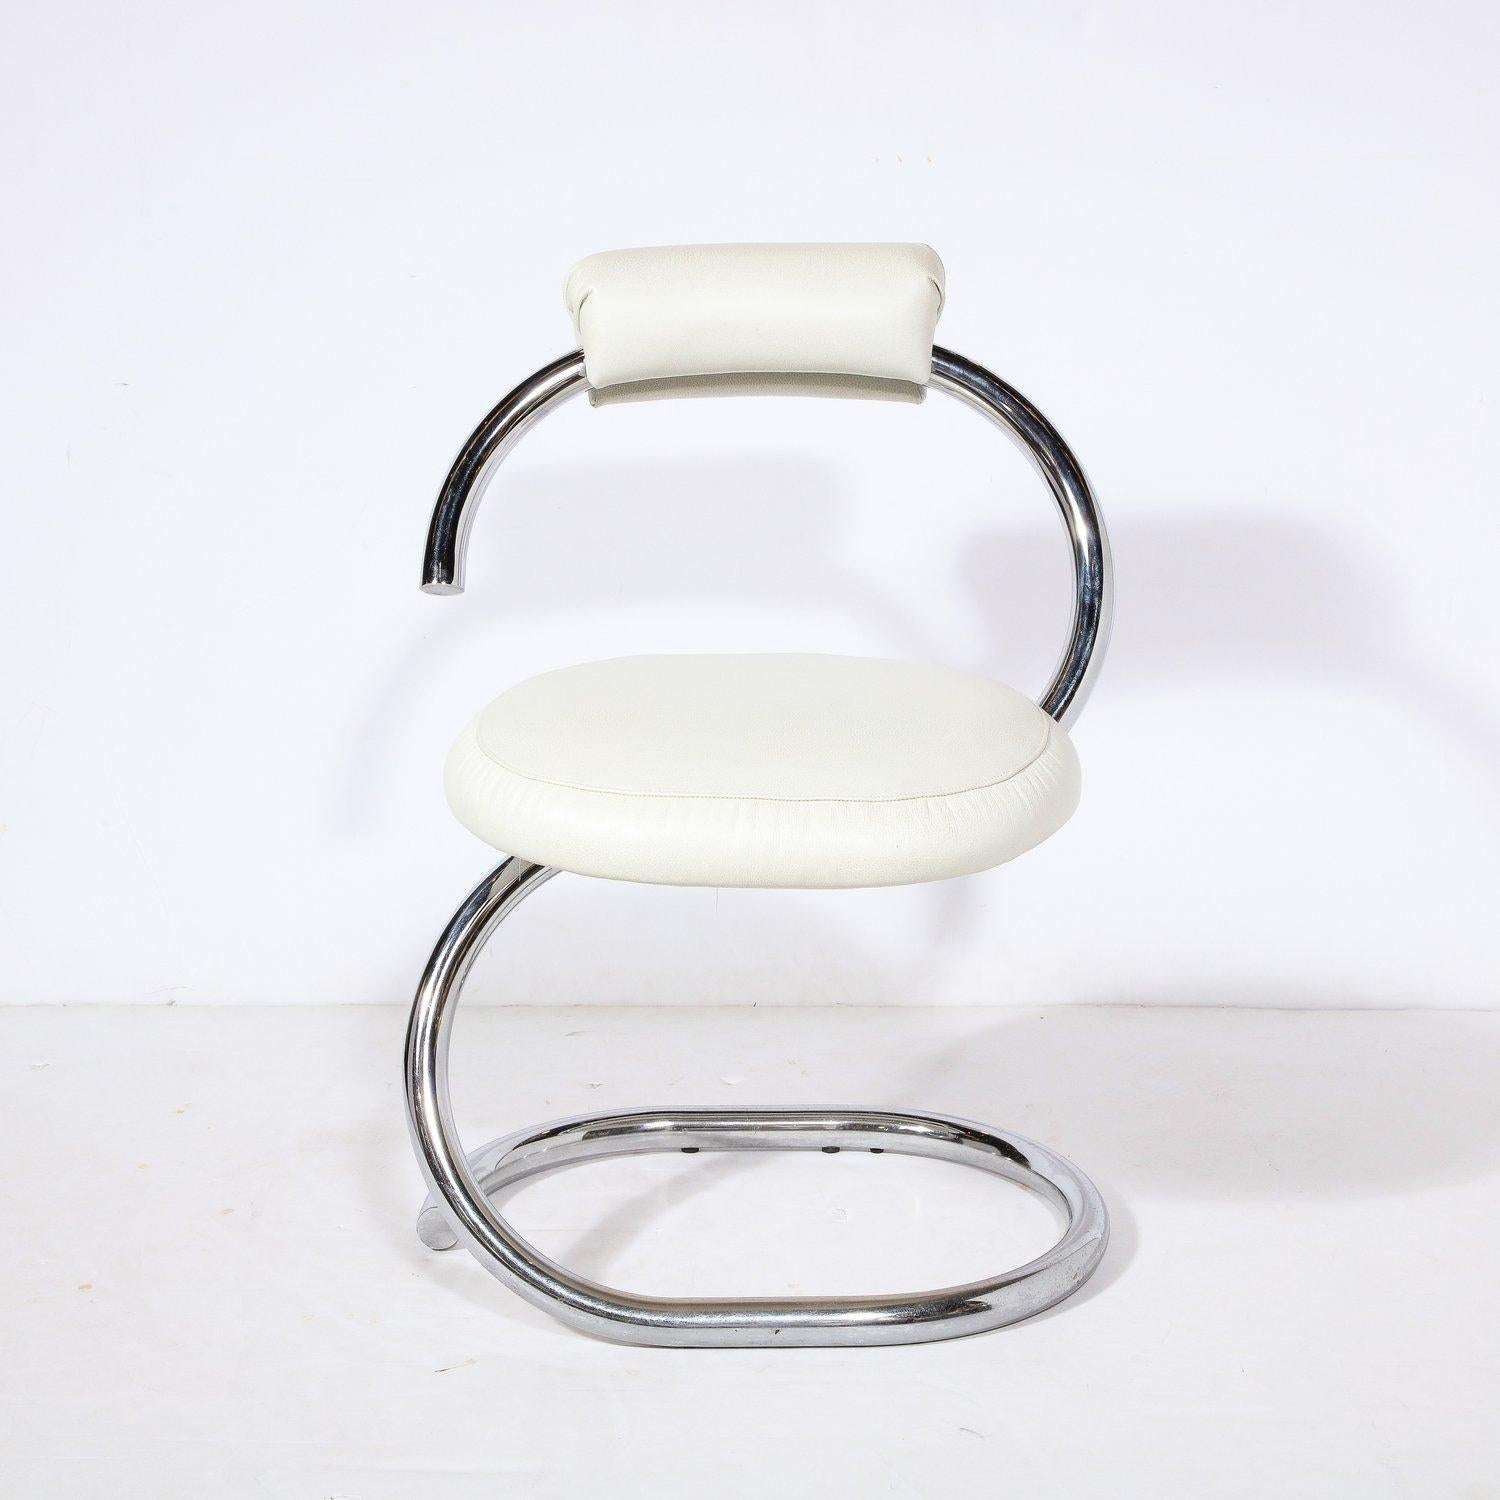 This Cobra chair is designed by Giotto Stoppino and originates from Italy, circa 1970. A standout example of mid-century modernist design, this chair is constructed of a single piece of aluminum that forms the base, seat and back. The amazing